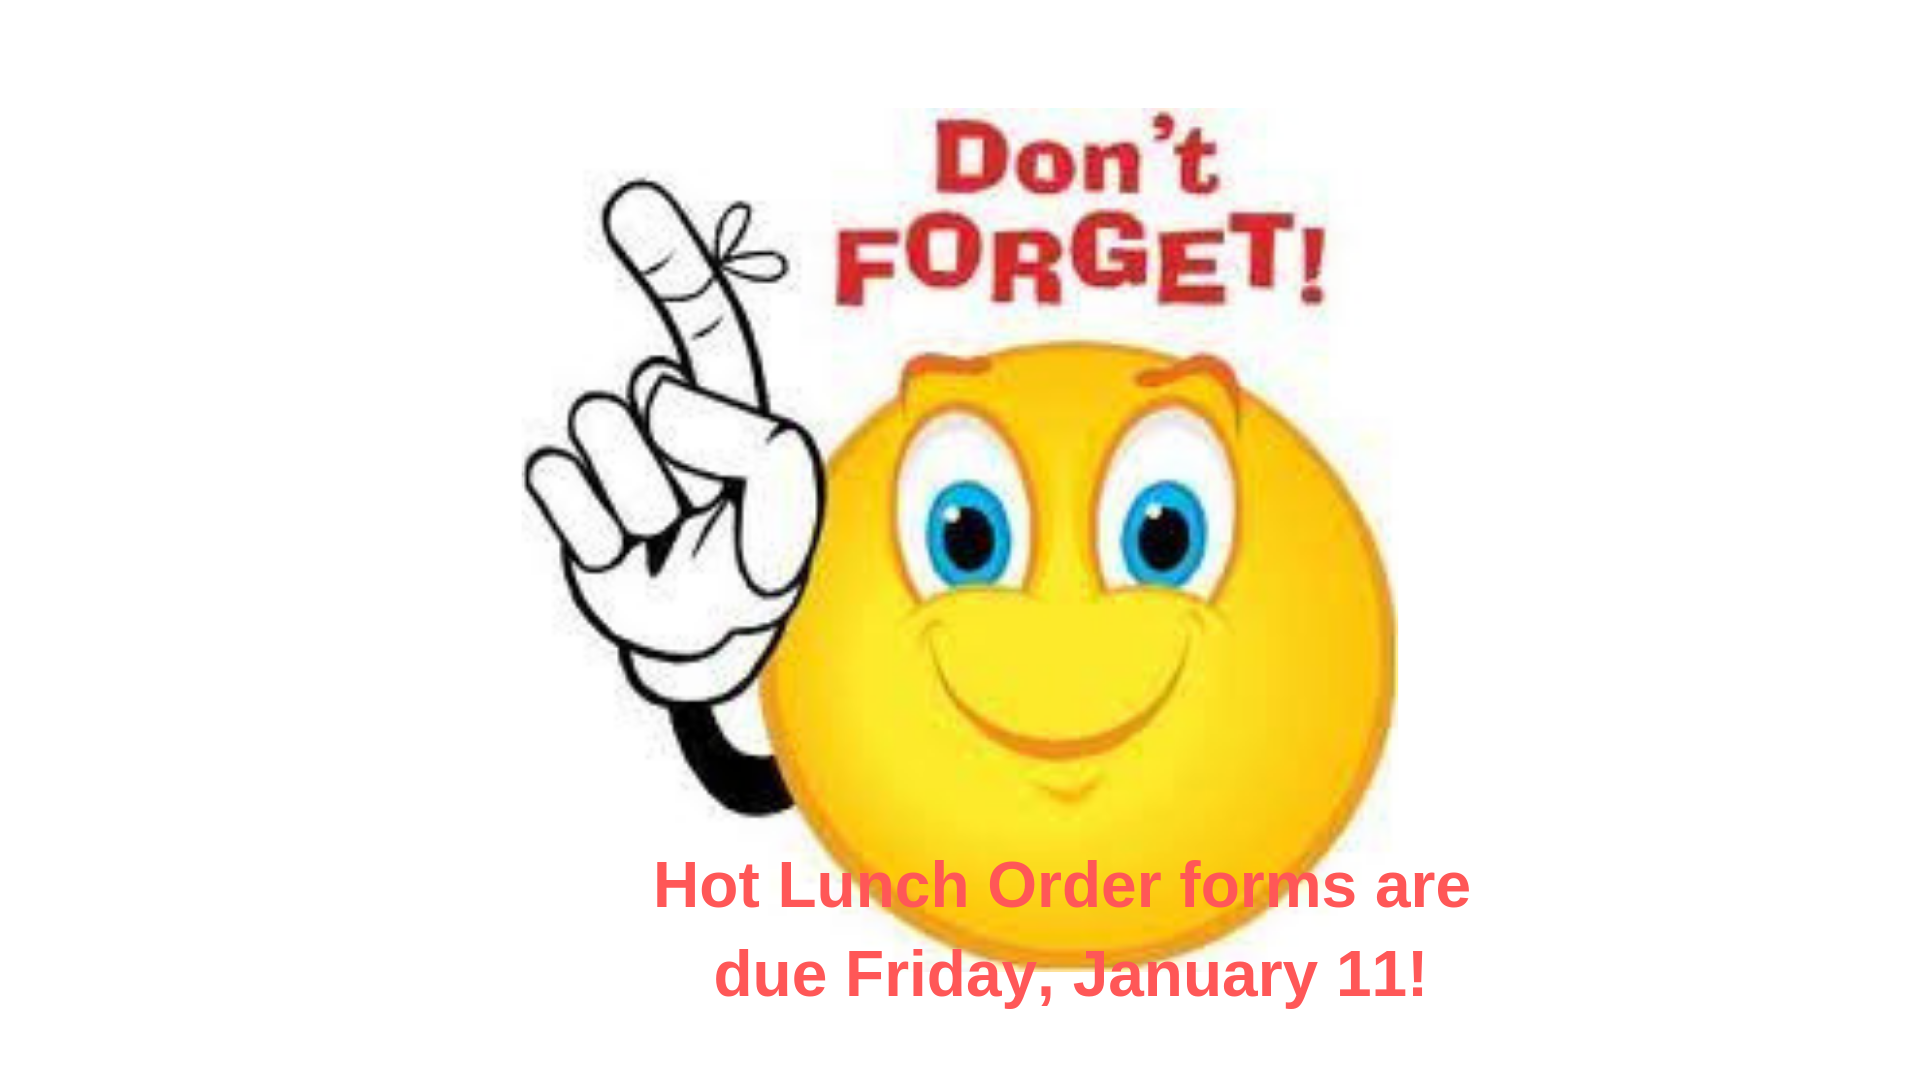 Hot Lunch Order forms are due Friday, January 11!.png